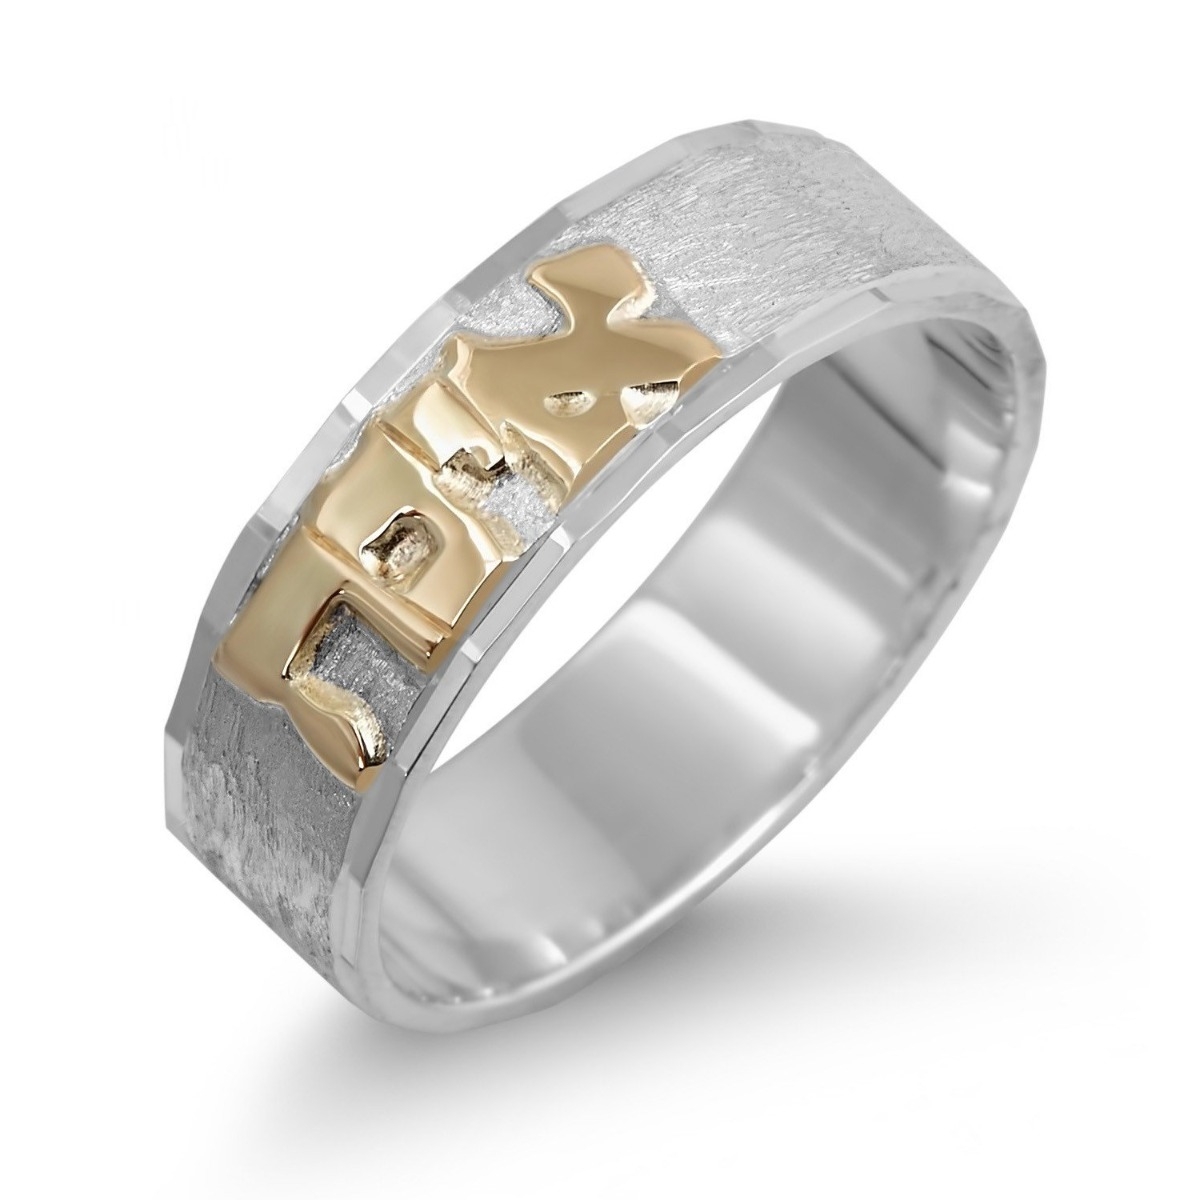 Sterling Silver and 14k Gold Diamond Finish Hebrew Name Ring - 1